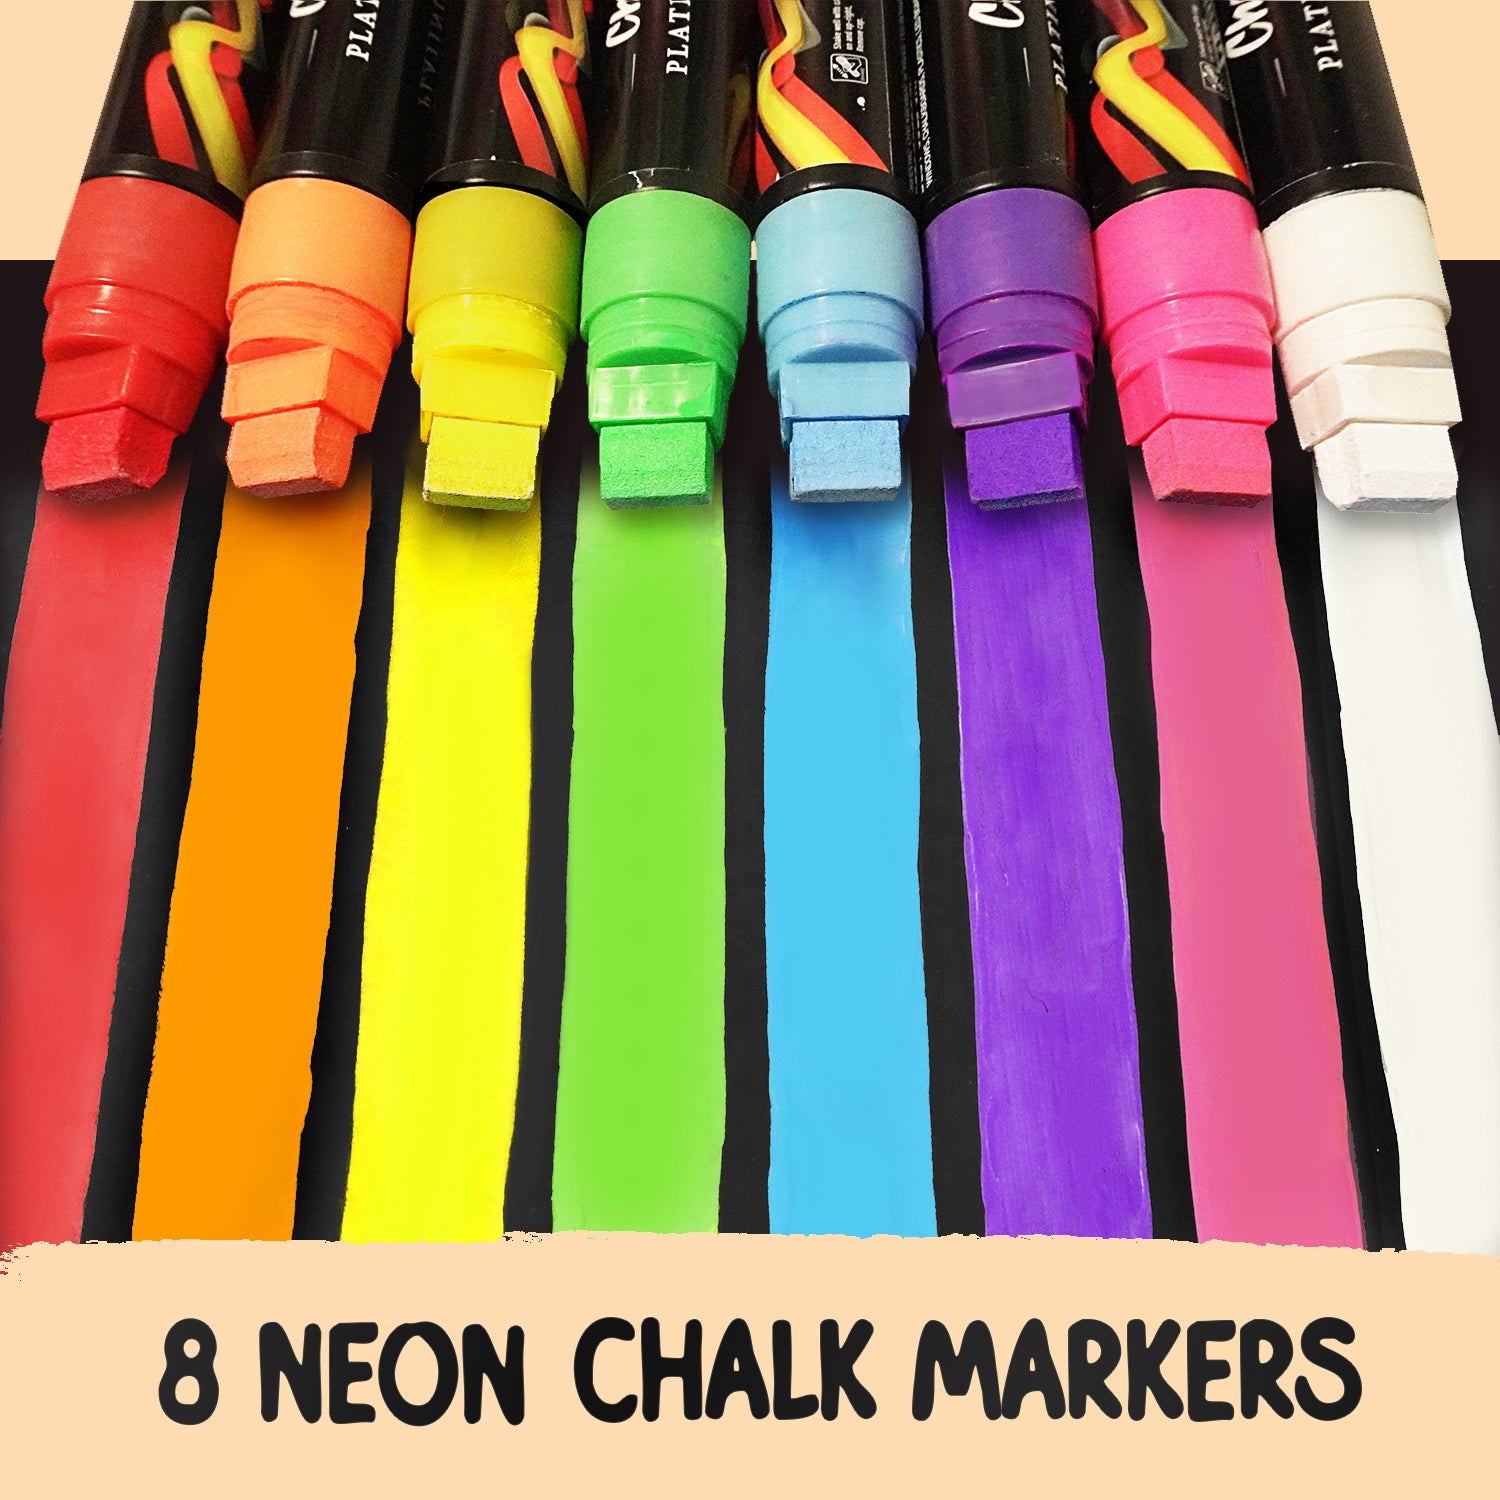 SCQAIZRX Chalk Window Markers for Cars Glass Washable - 8 Colors Liquid  Chalk Markers Pen, 15mm Jumbo Window Paint Markers for Auto Glass, Neon